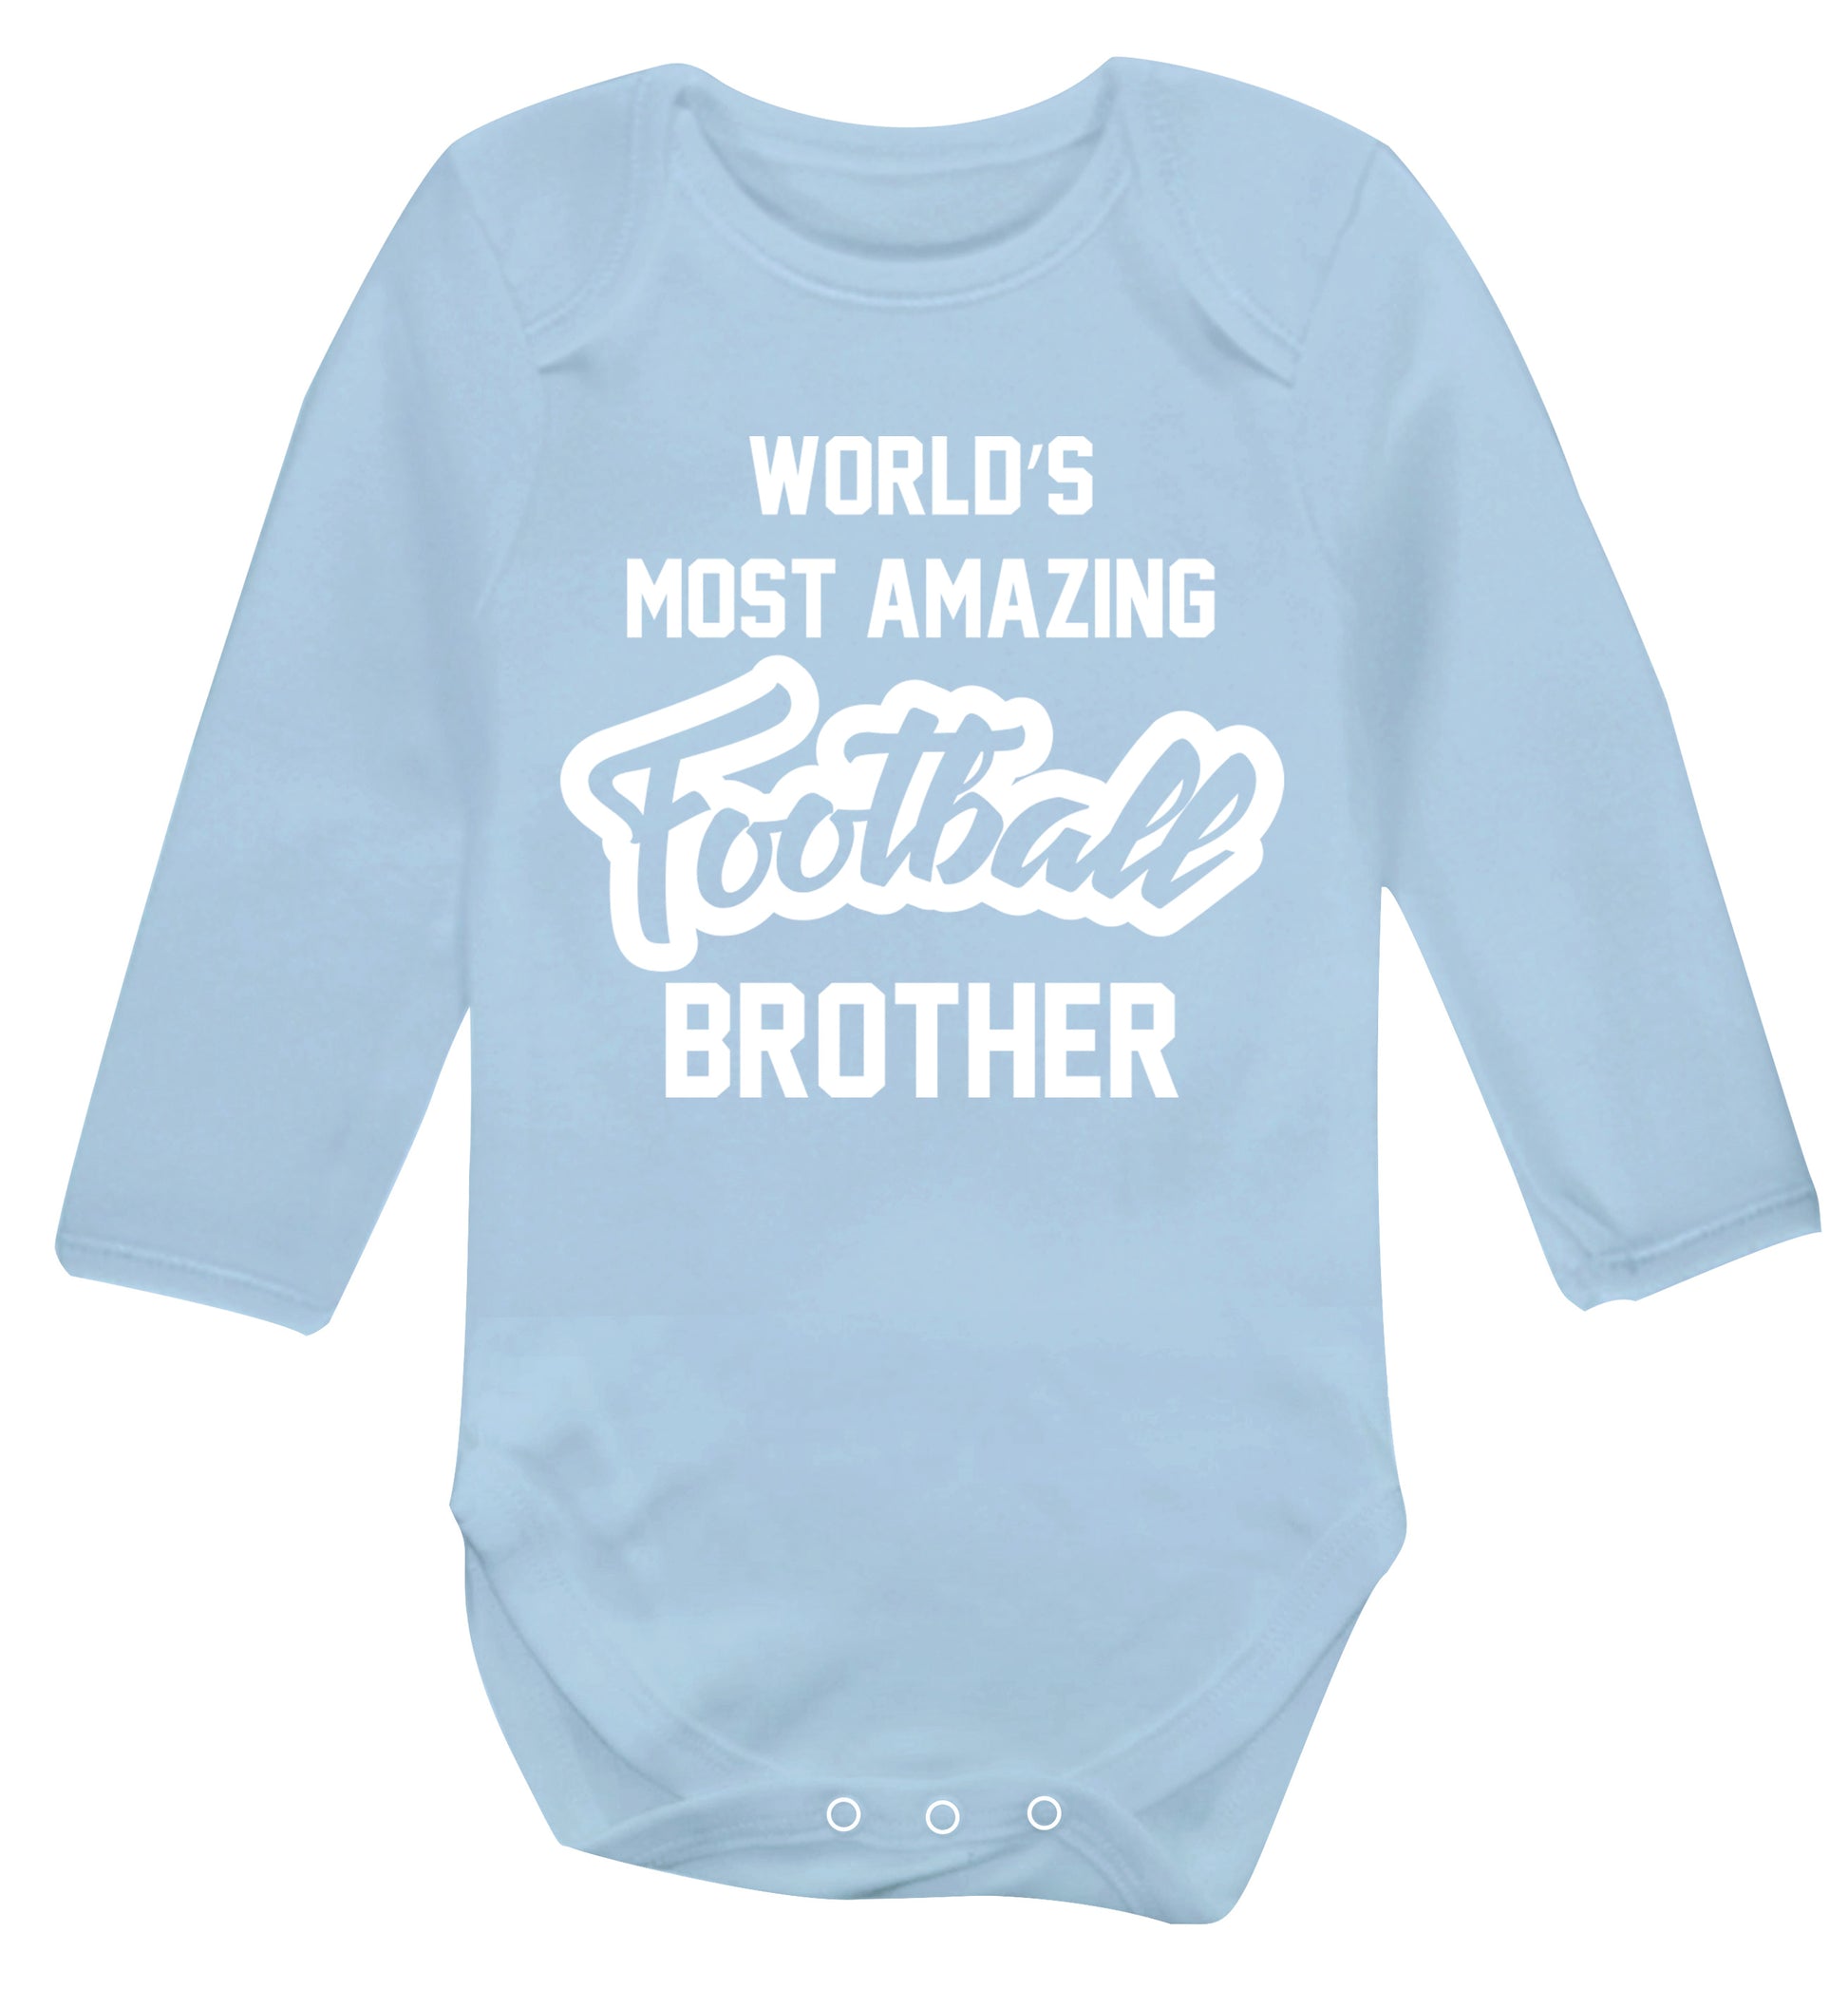 Worlds most amazing football brother Baby Vest long sleeved pale blue 6-12 months